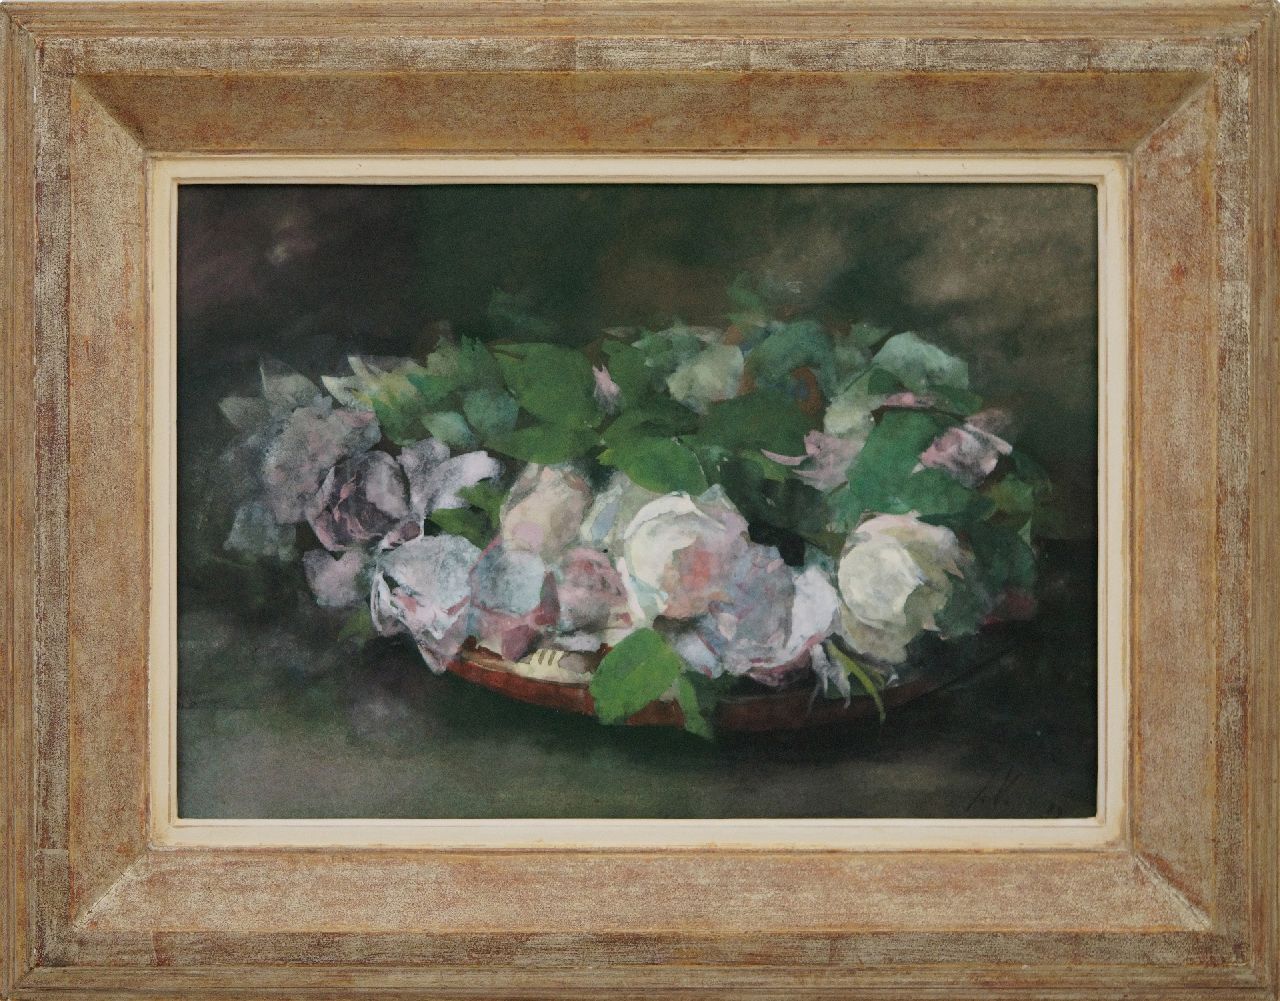 Voerman sr. J.  | Jan Voerman sr., Pink 'La France'-roses in a bowl, watercolour on paper 30.0 x 44.0 cm, signed l.r. with initials and dated '89